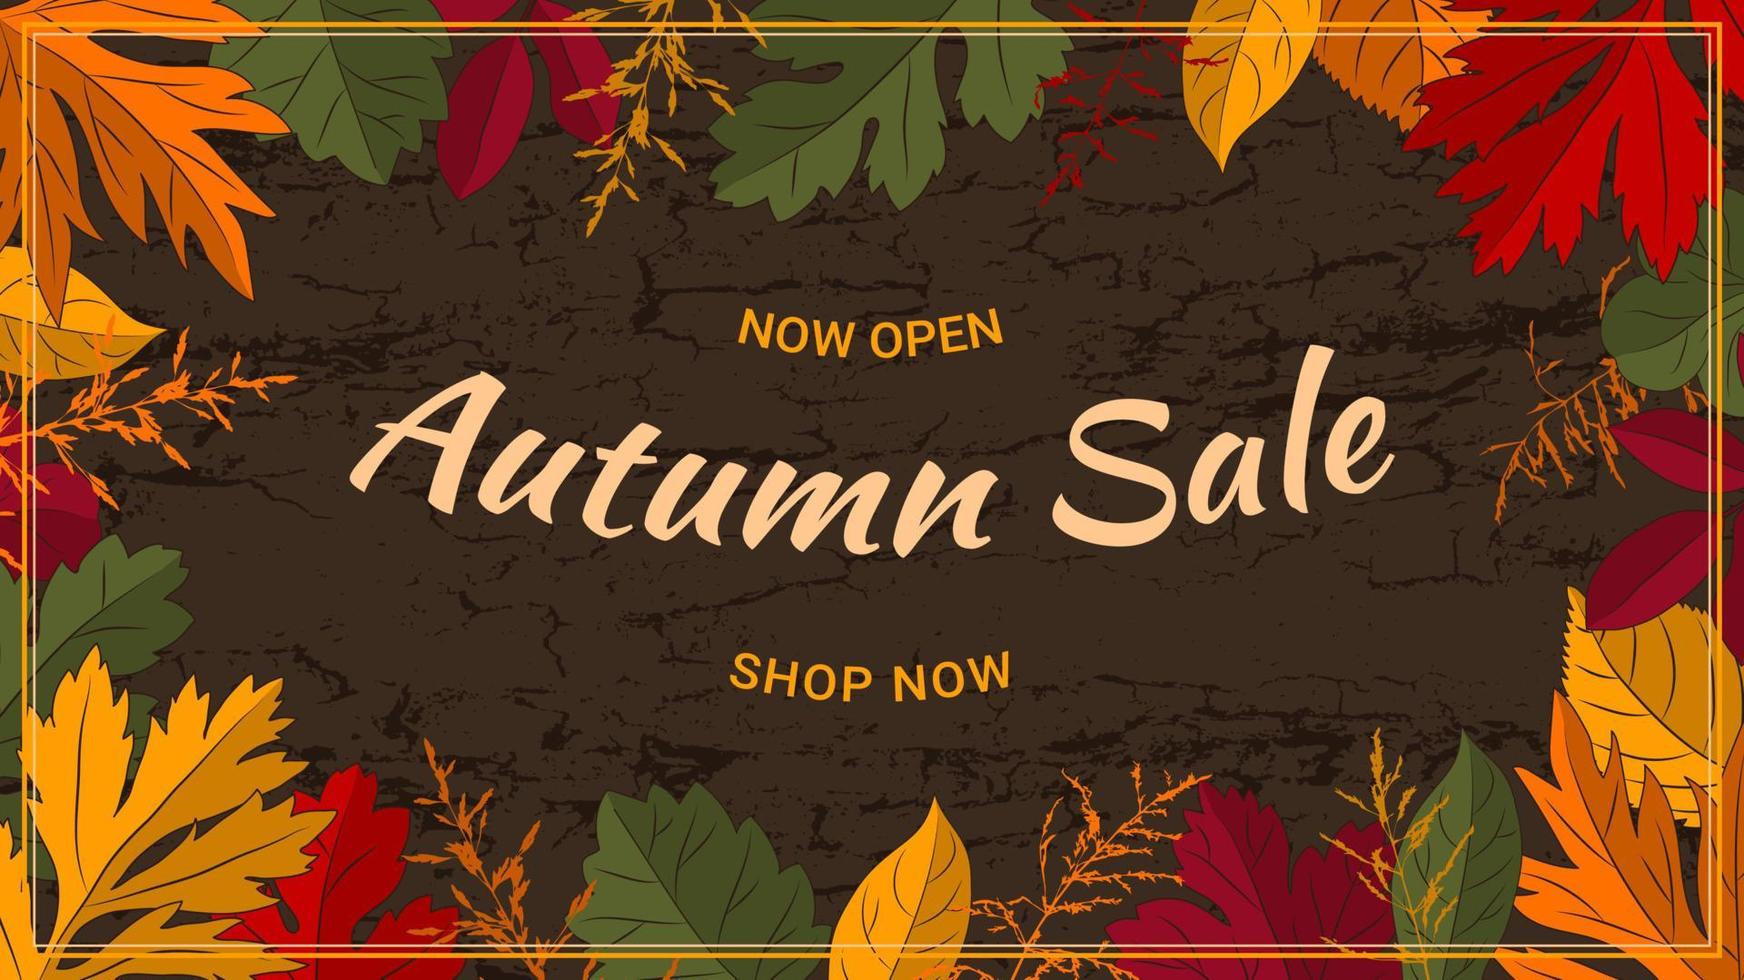 Autumn sale background with leaves for shopping sale, promo poster, flyer, web banner. Colorful leaves, grass on dark brown bark wood texture. Horizontal composition. Vector illustration.